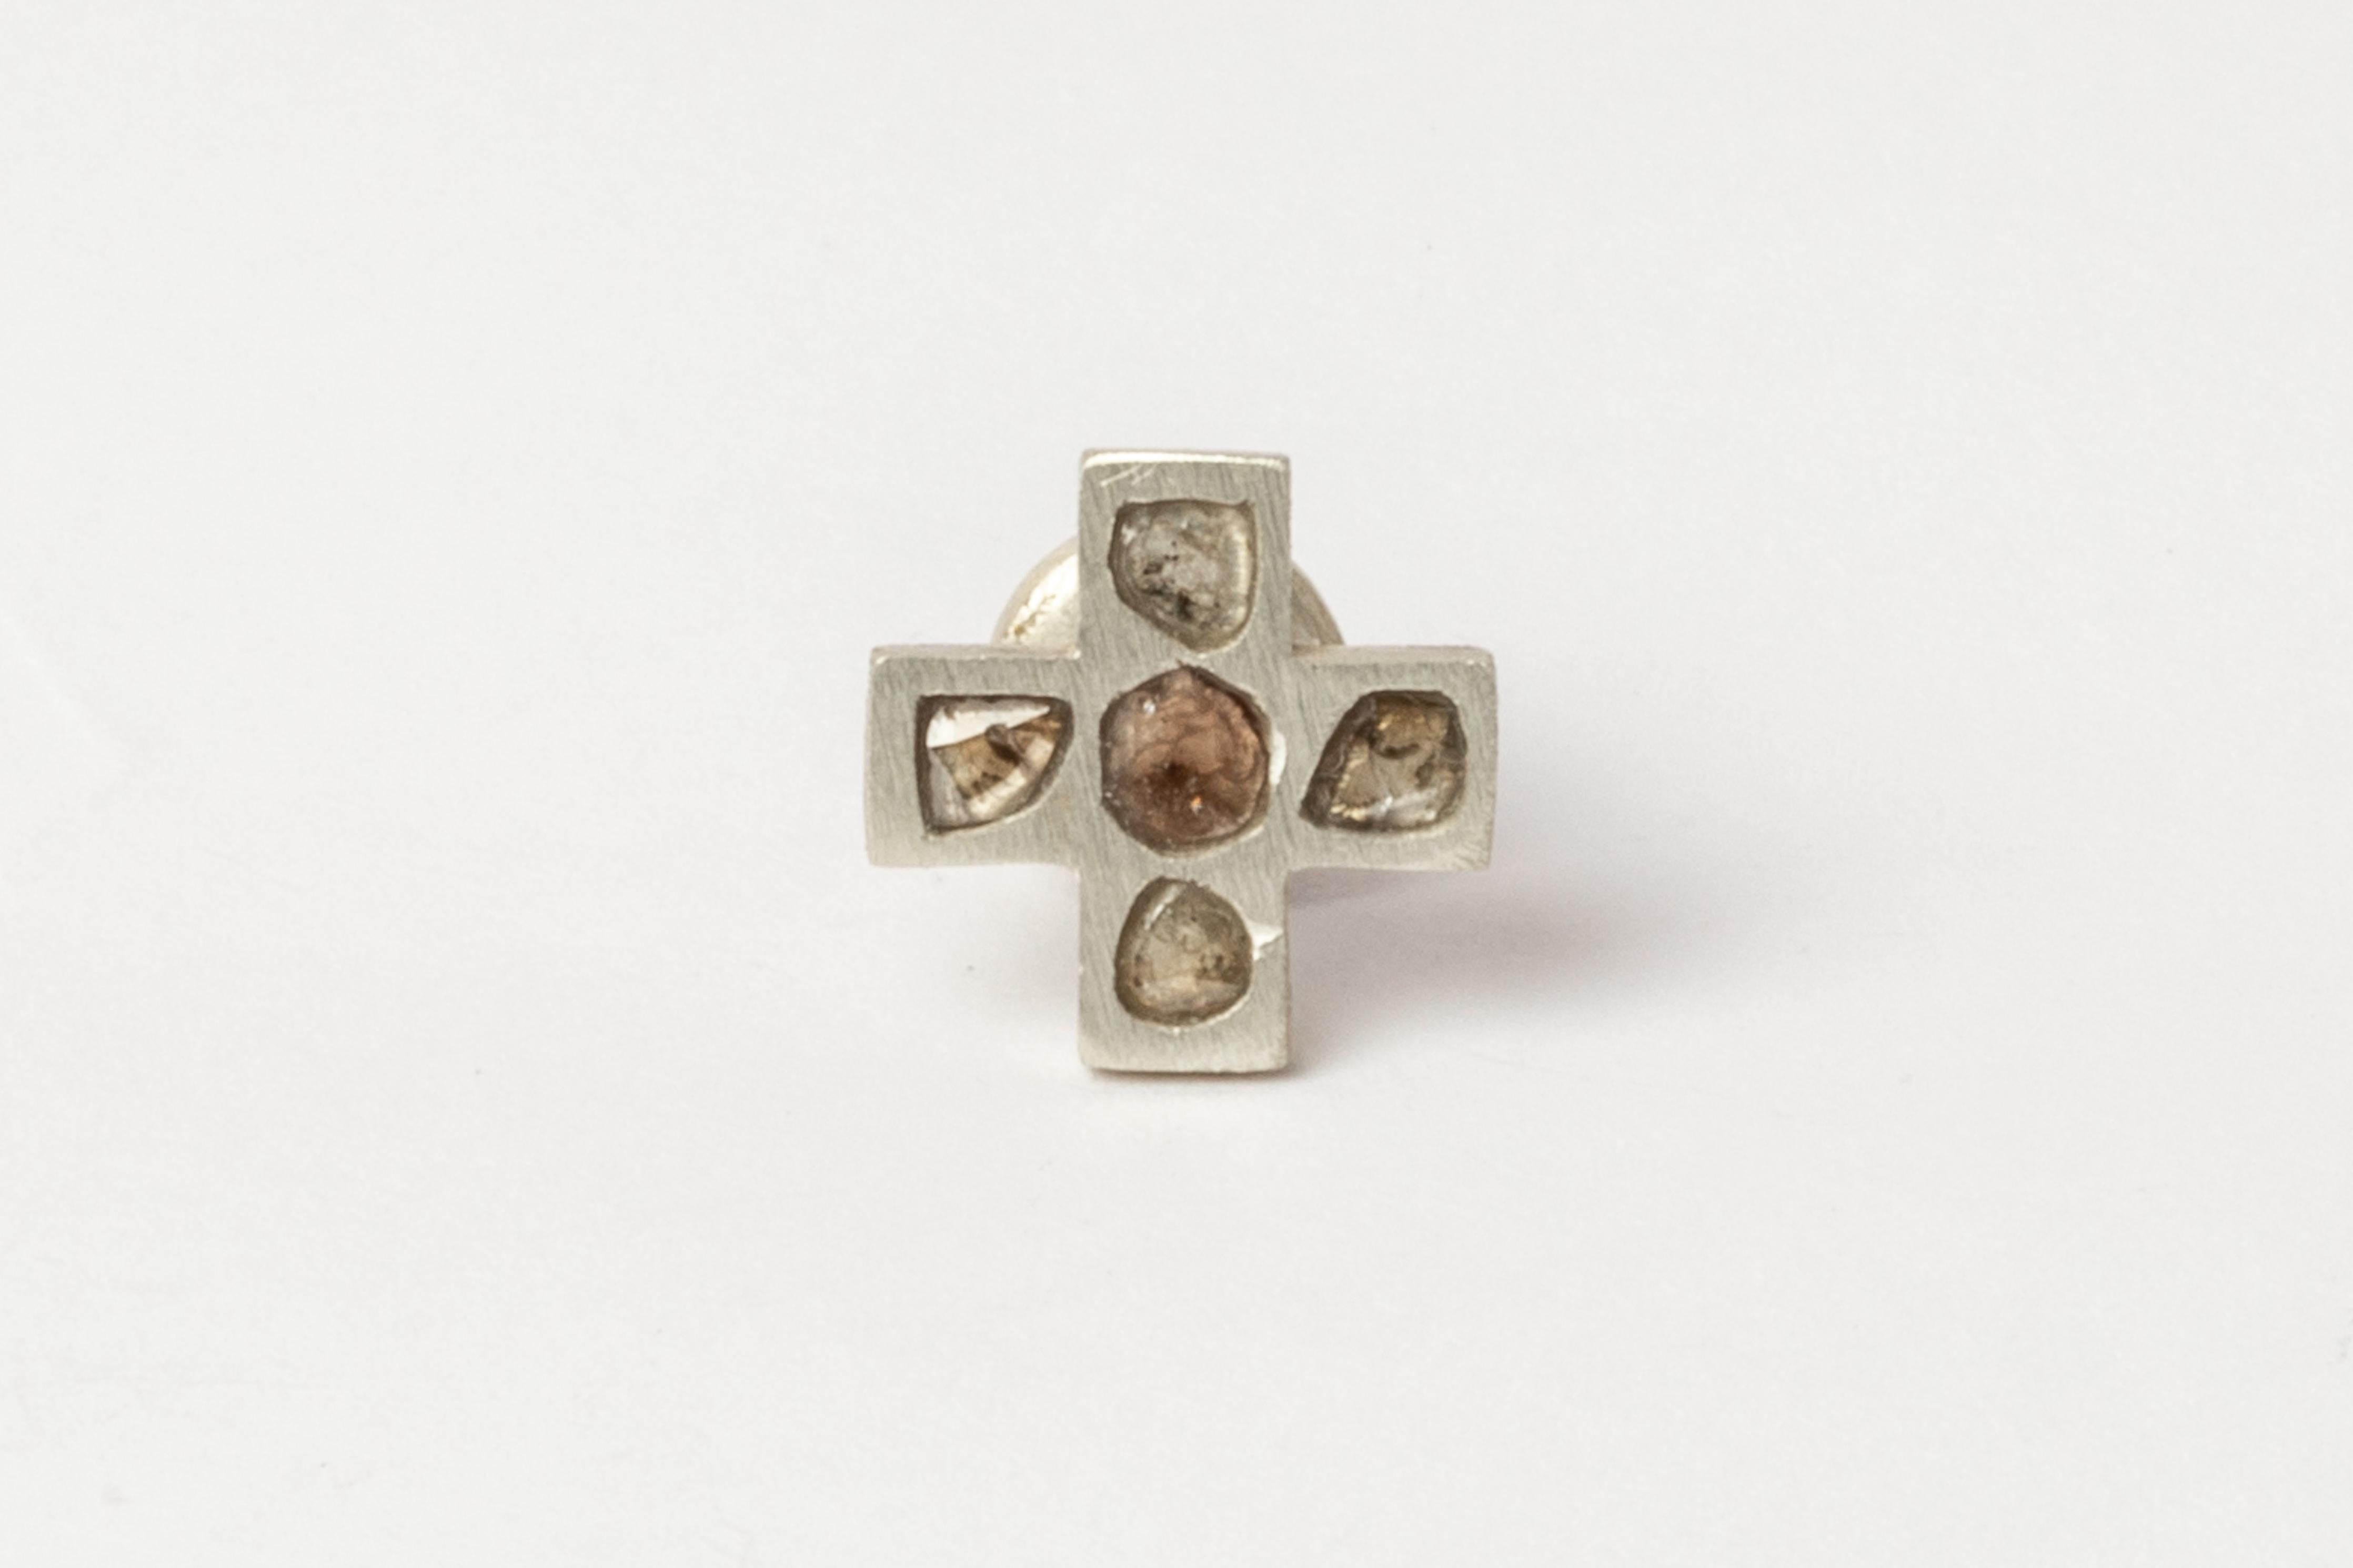 Plus earring in matte sterling silver and rough diamond. The stones used in this item are cuts of diamond material that are removed from a larger chunk of diamond as they are attempting to get to the perfect diamond in the center. Each stone